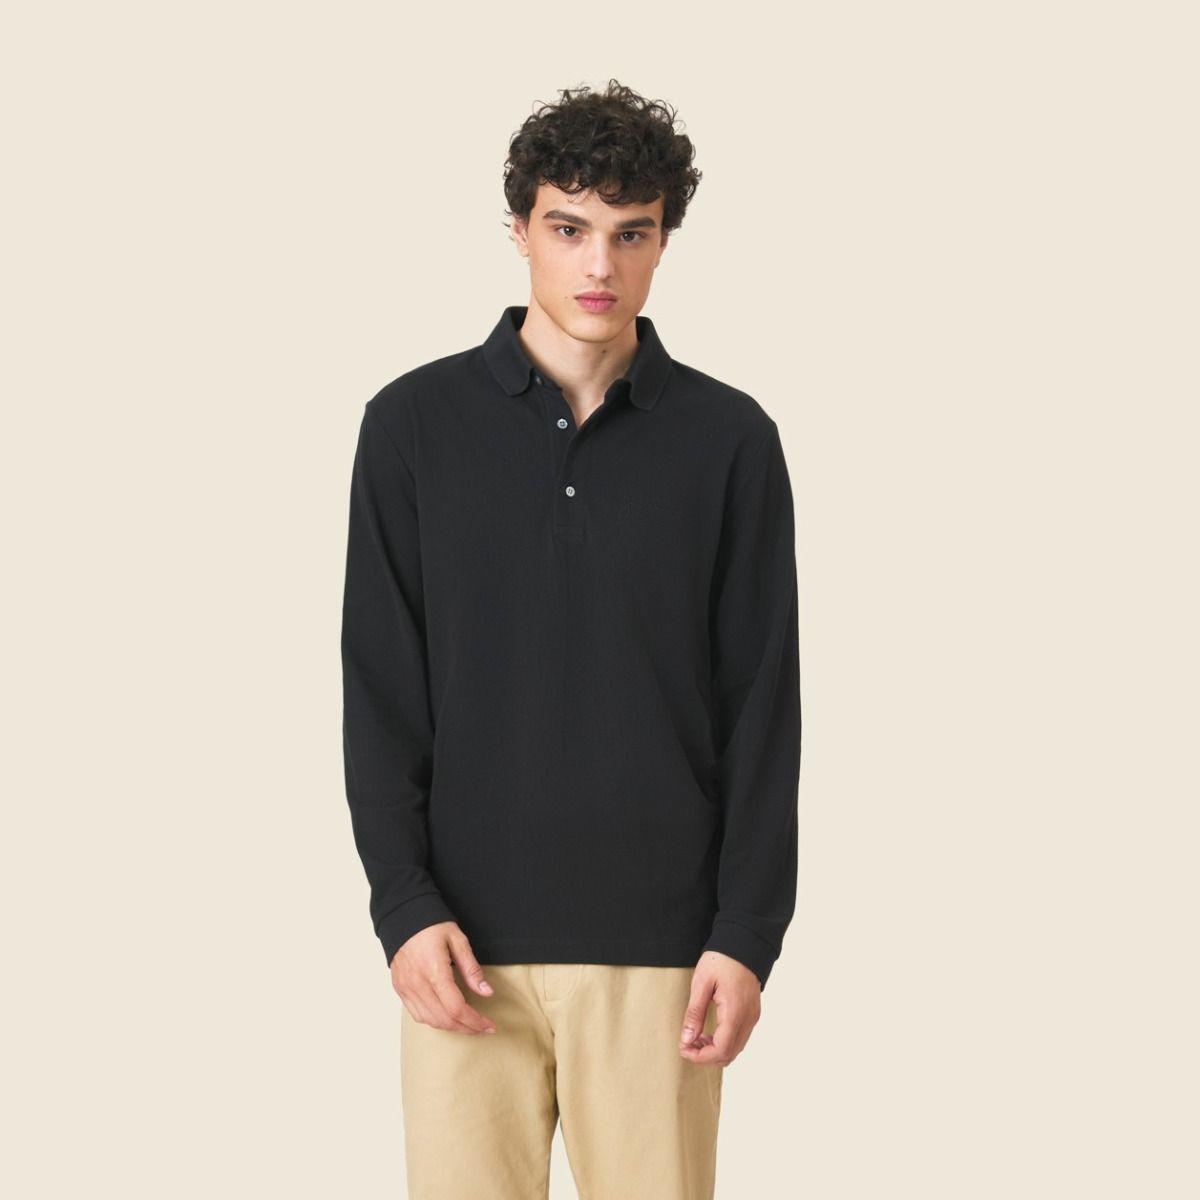 Solid Long Sleeve Cotton Collar with Logo Polo Shirt - Black